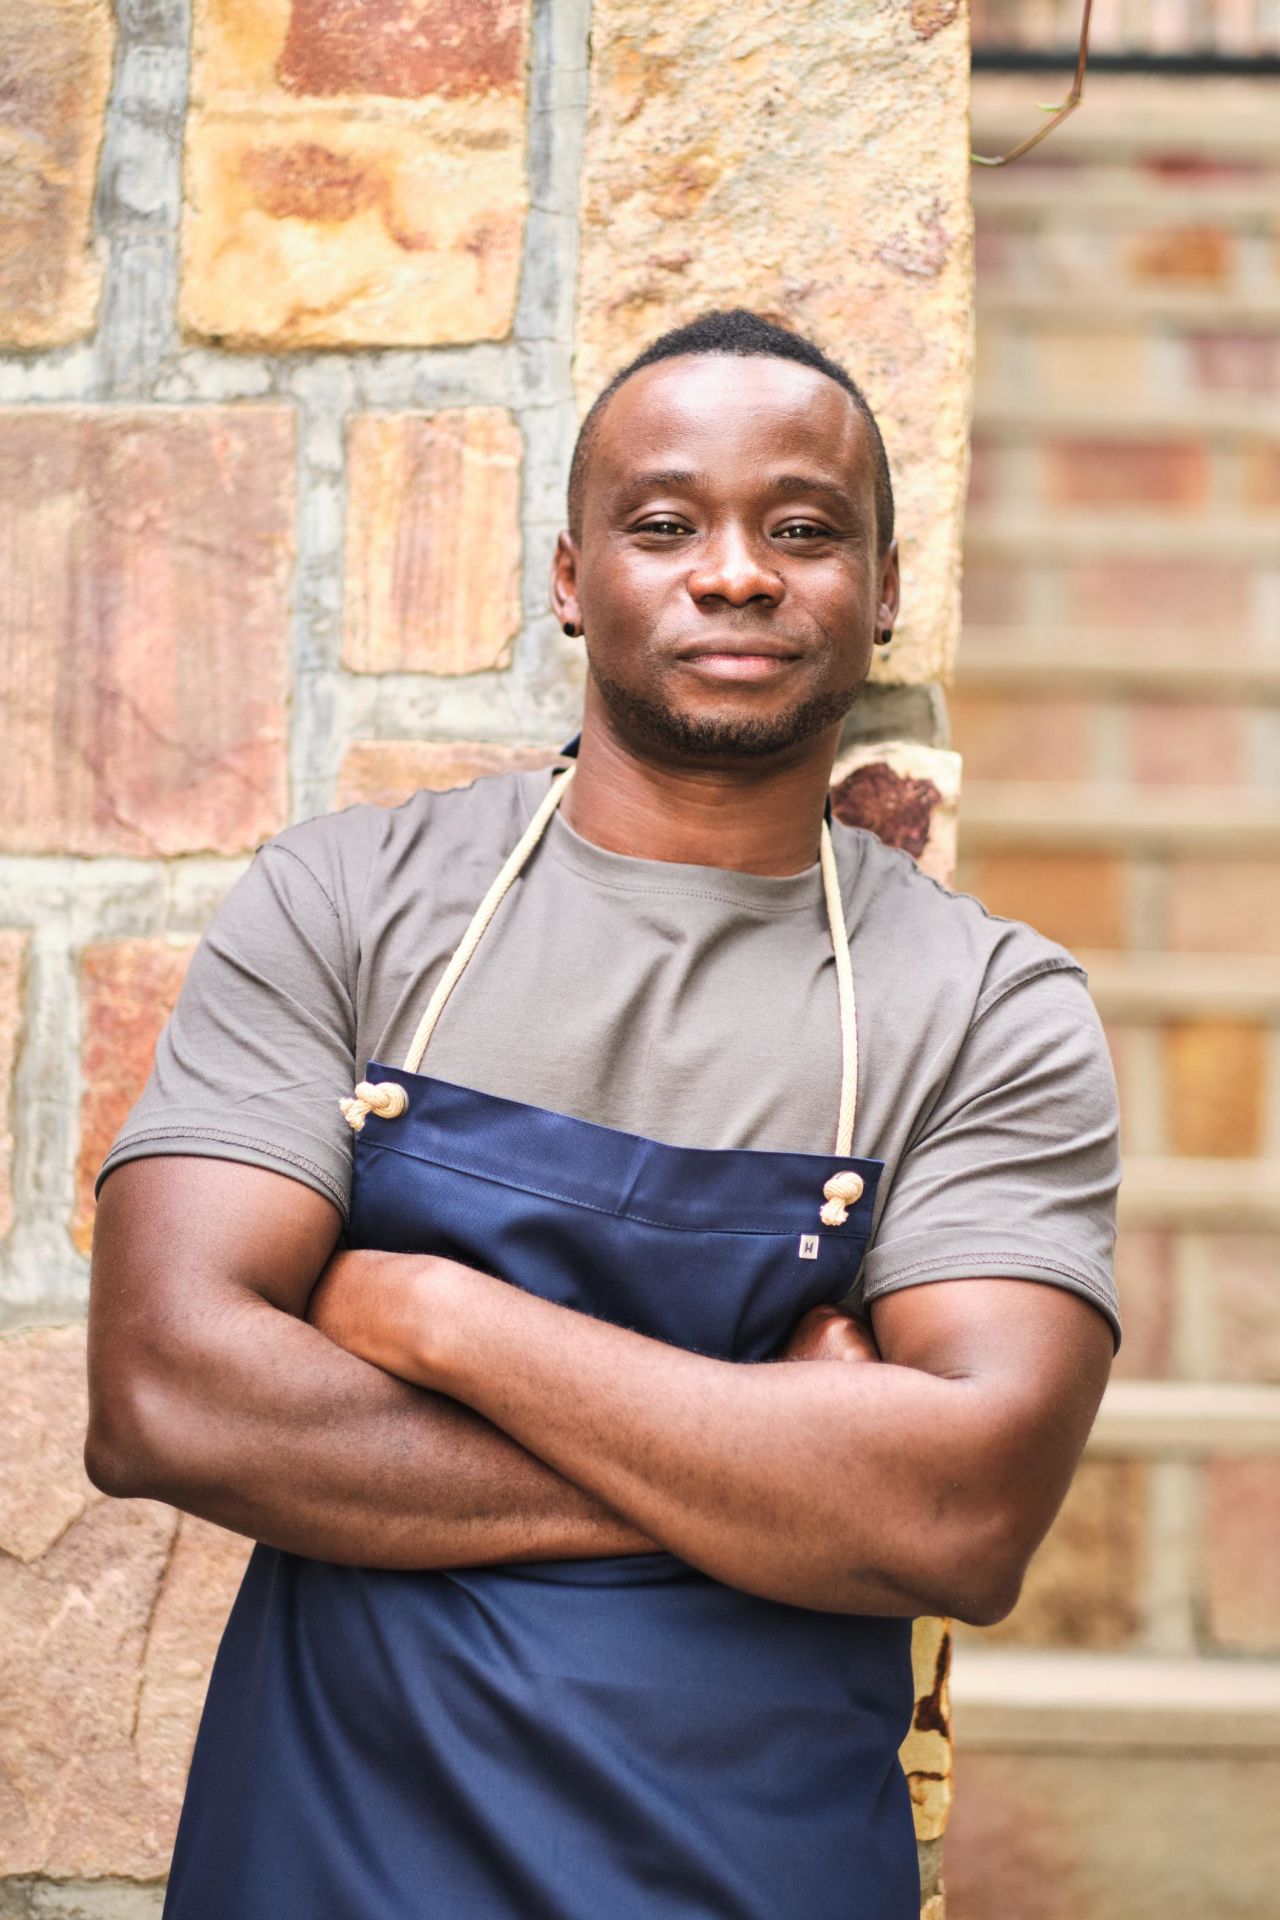 Dieuveil Malonga (pictured) has always had a passion for food, and was inspired by his grandmother to pursue a career in the culinary arts.